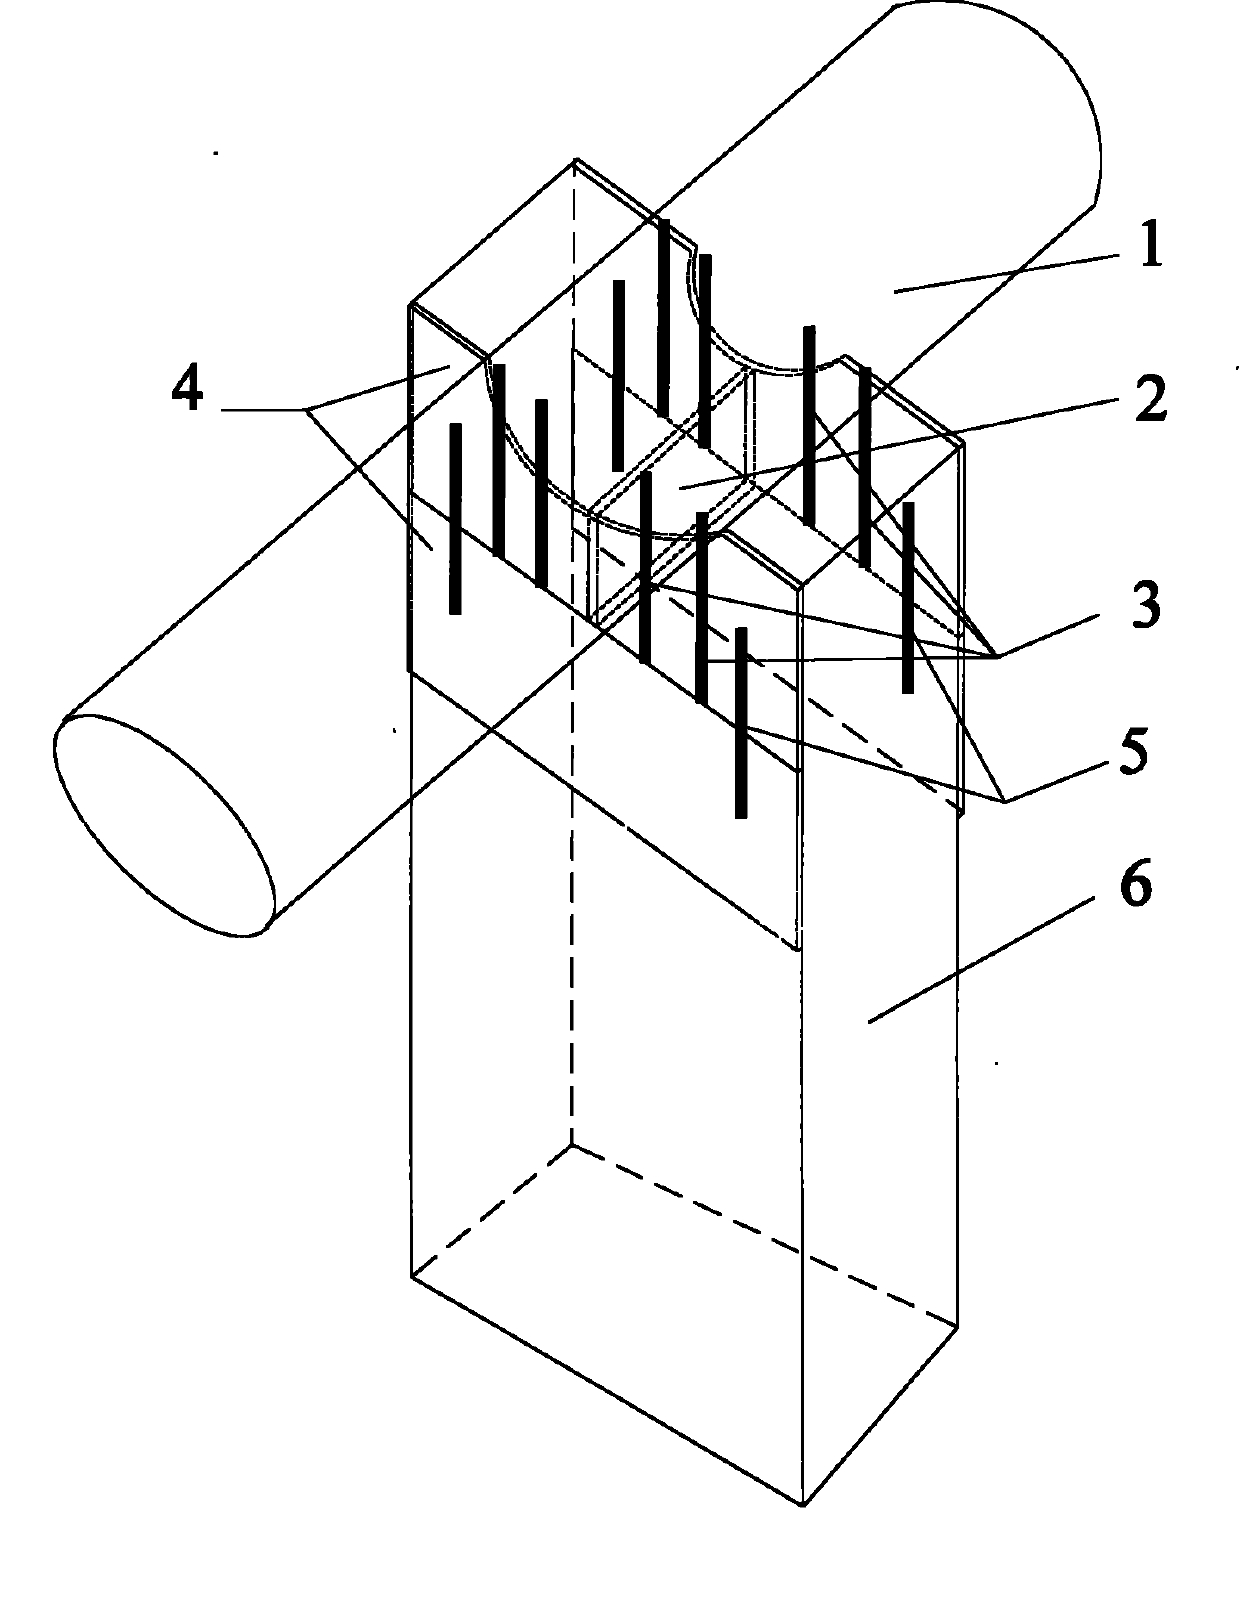 Structure of connection of circular steel tube type lightweight aggregate concrete beam and through reinforcing steel bar of concrete pier and construction process thereof